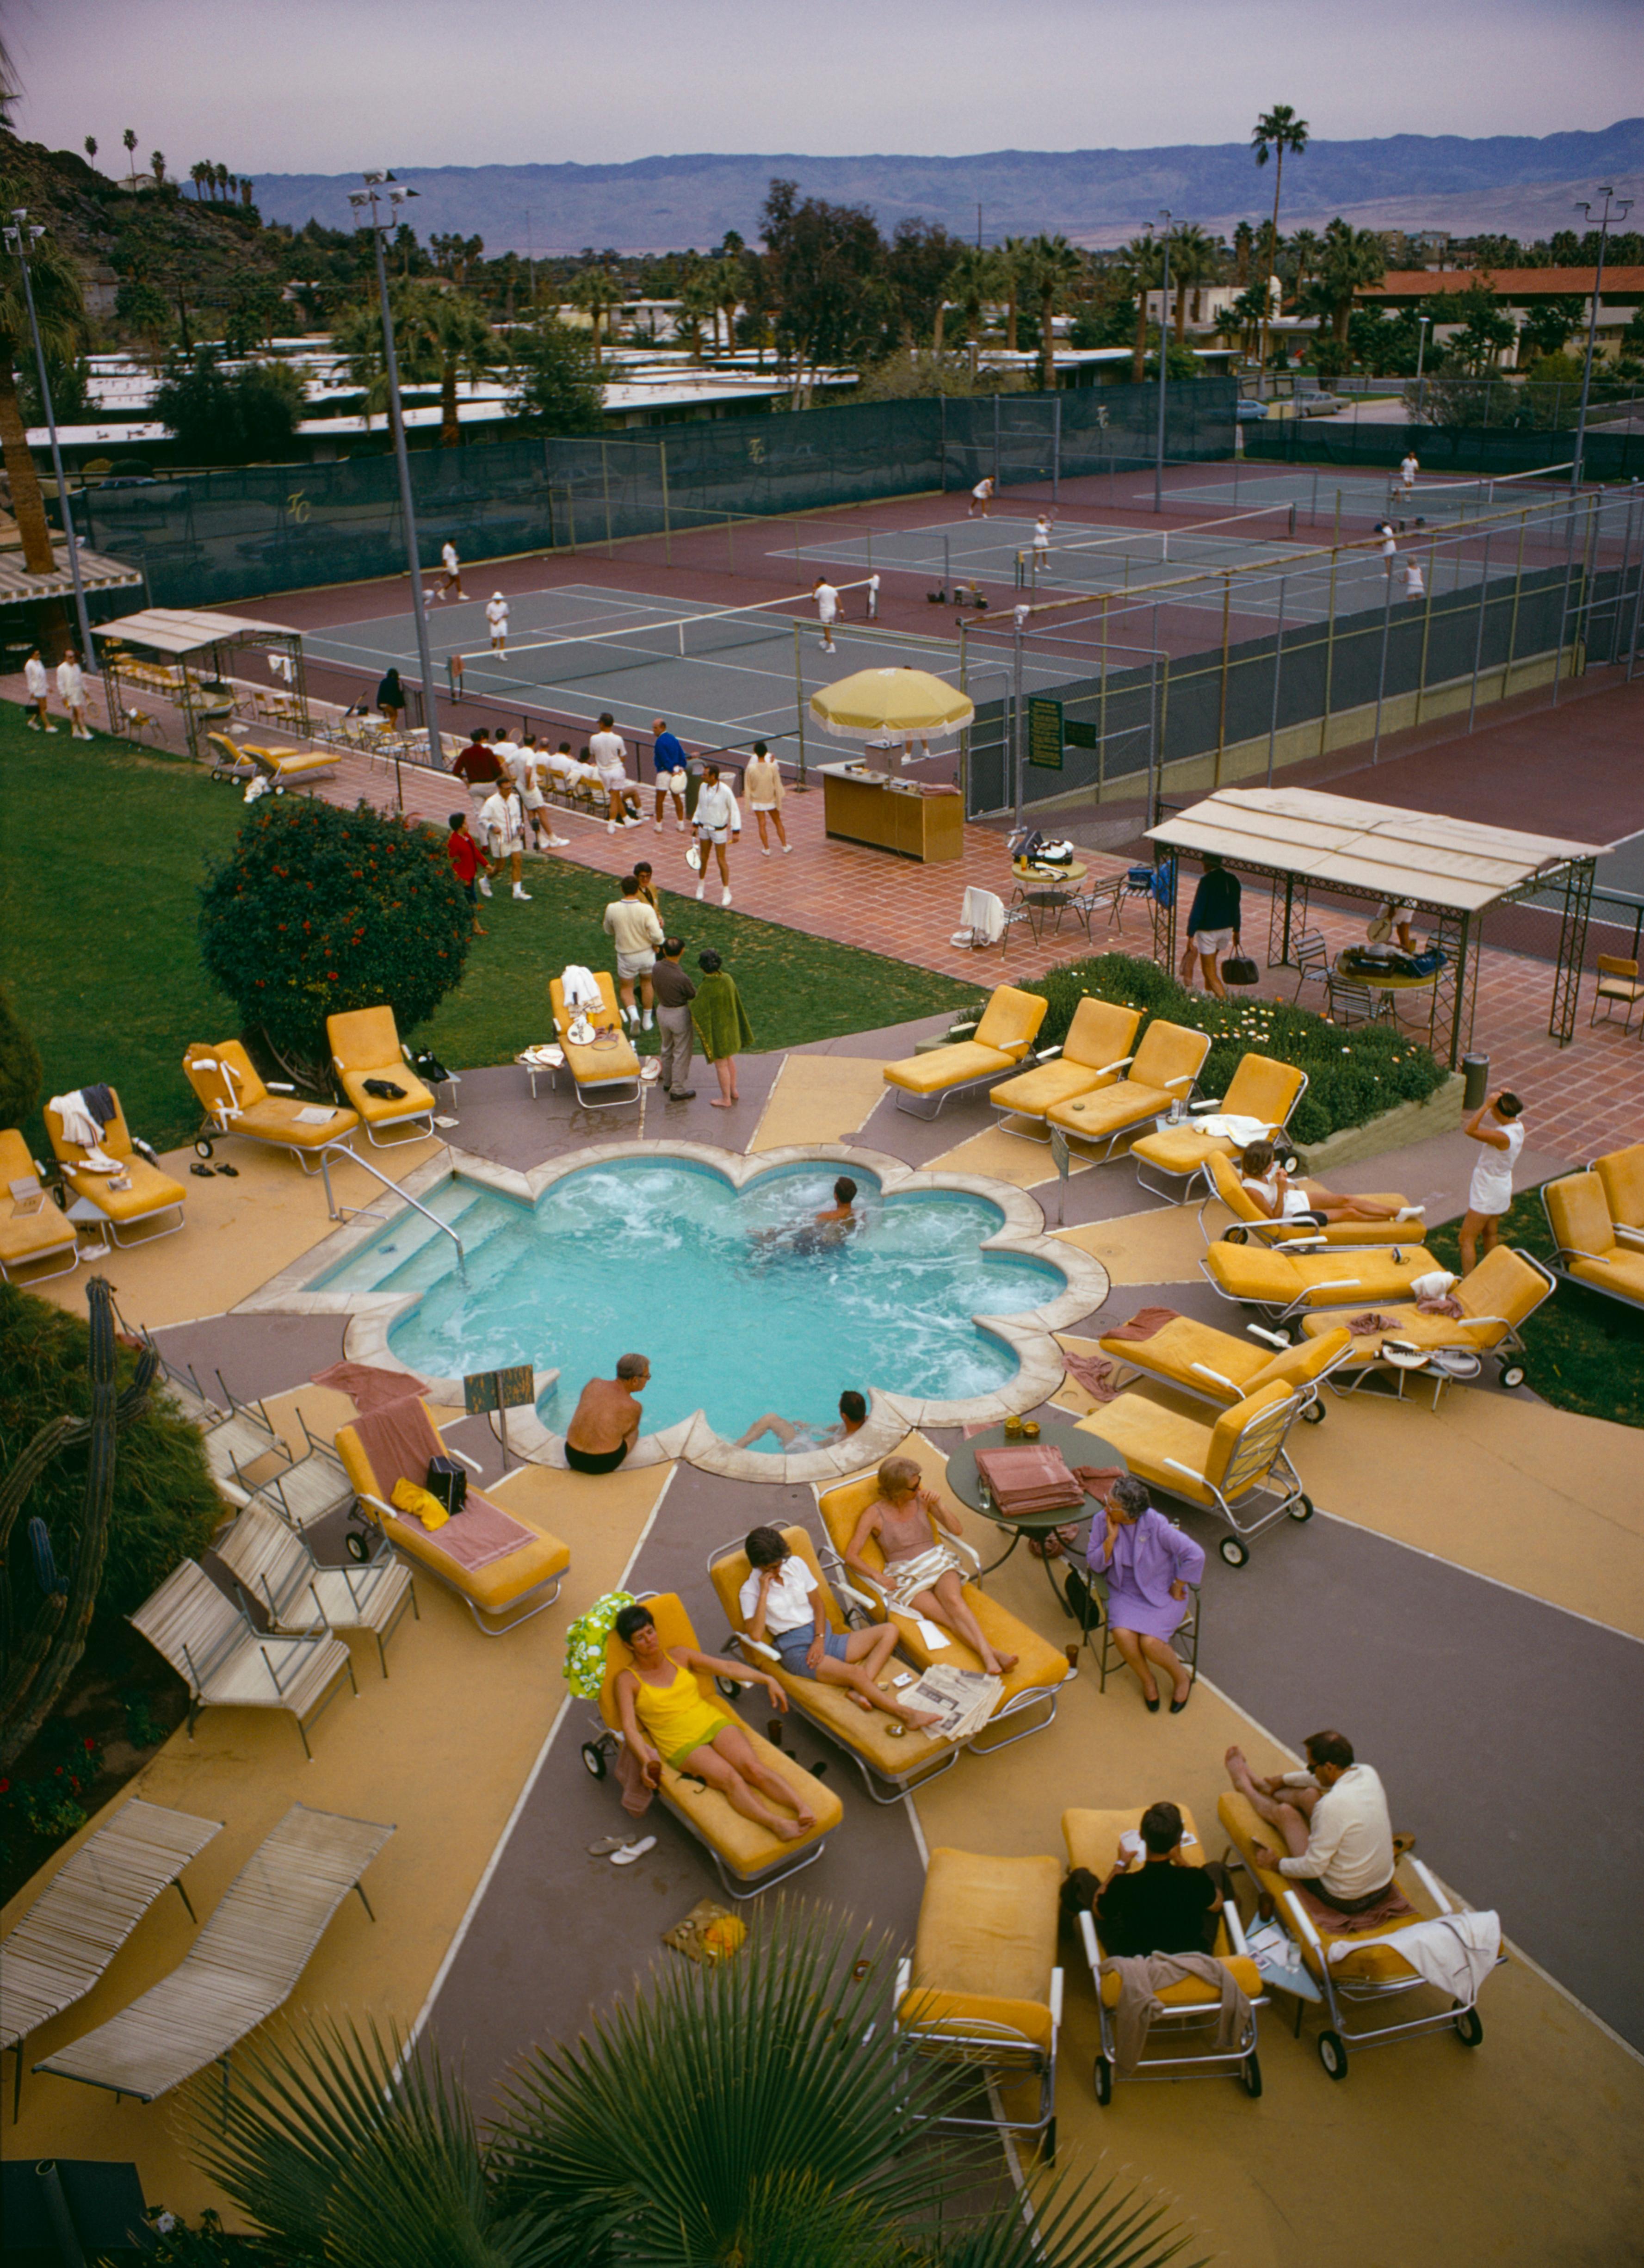 Slim Aarons
Relaxing at the Club
1970
Chromogenic Lambda print
Estate stamped and hand numbered edition of 150 with certificate of authenticity. 

Members sunbathe around the pool at Palm Springs Tennis Club, California, circa 1970. (Photo by Slim